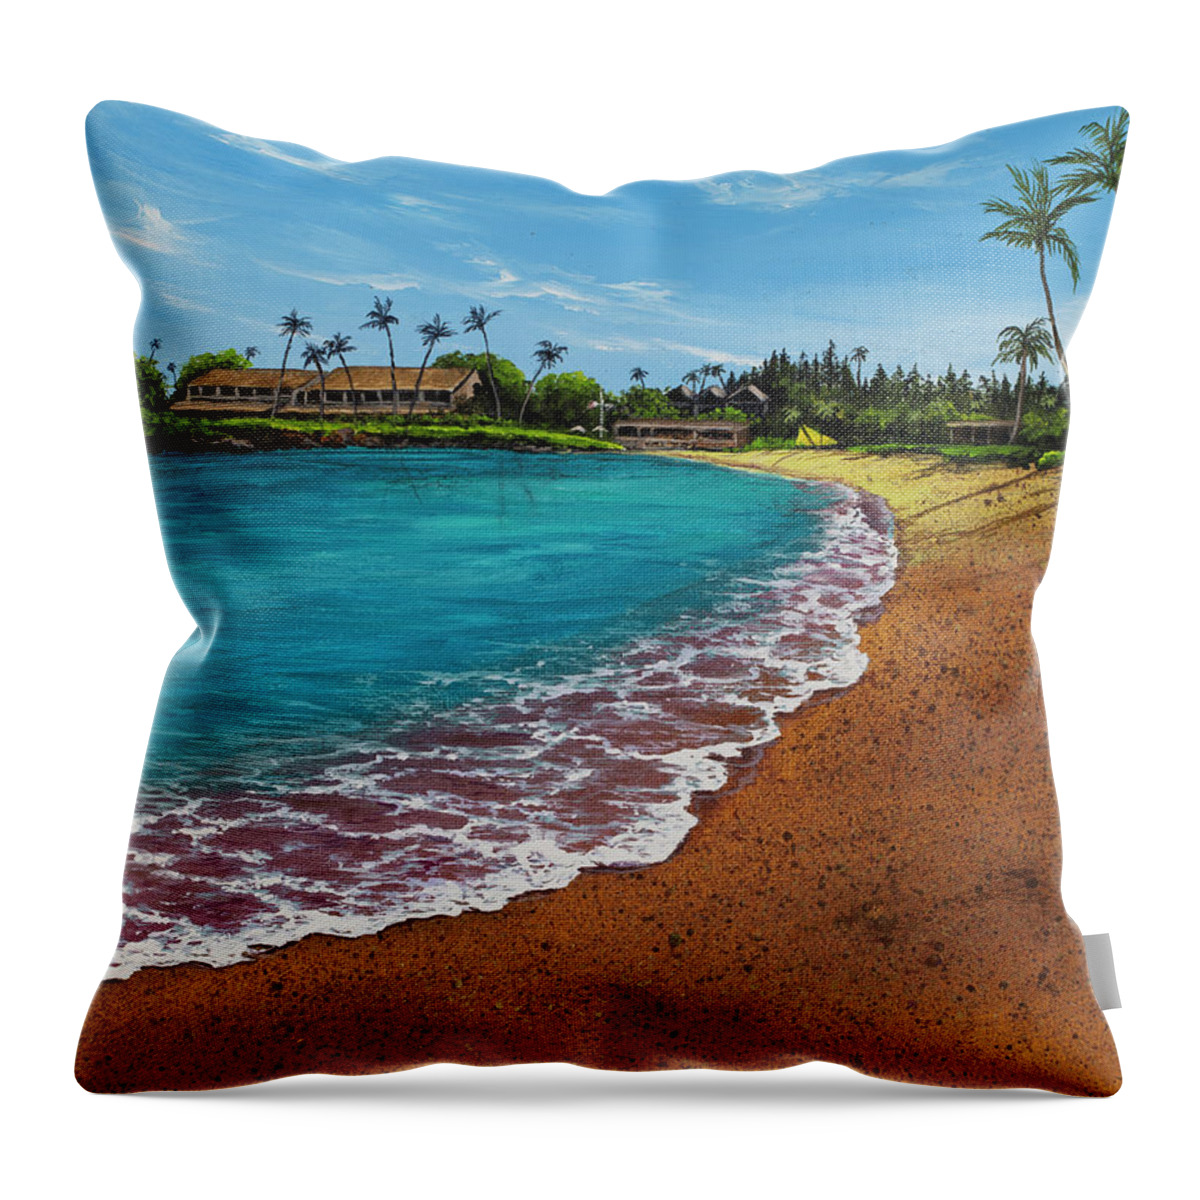 Beach Throw Pillow featuring the painting Napili Bay During Covid 19 by Darice Machel McGuire